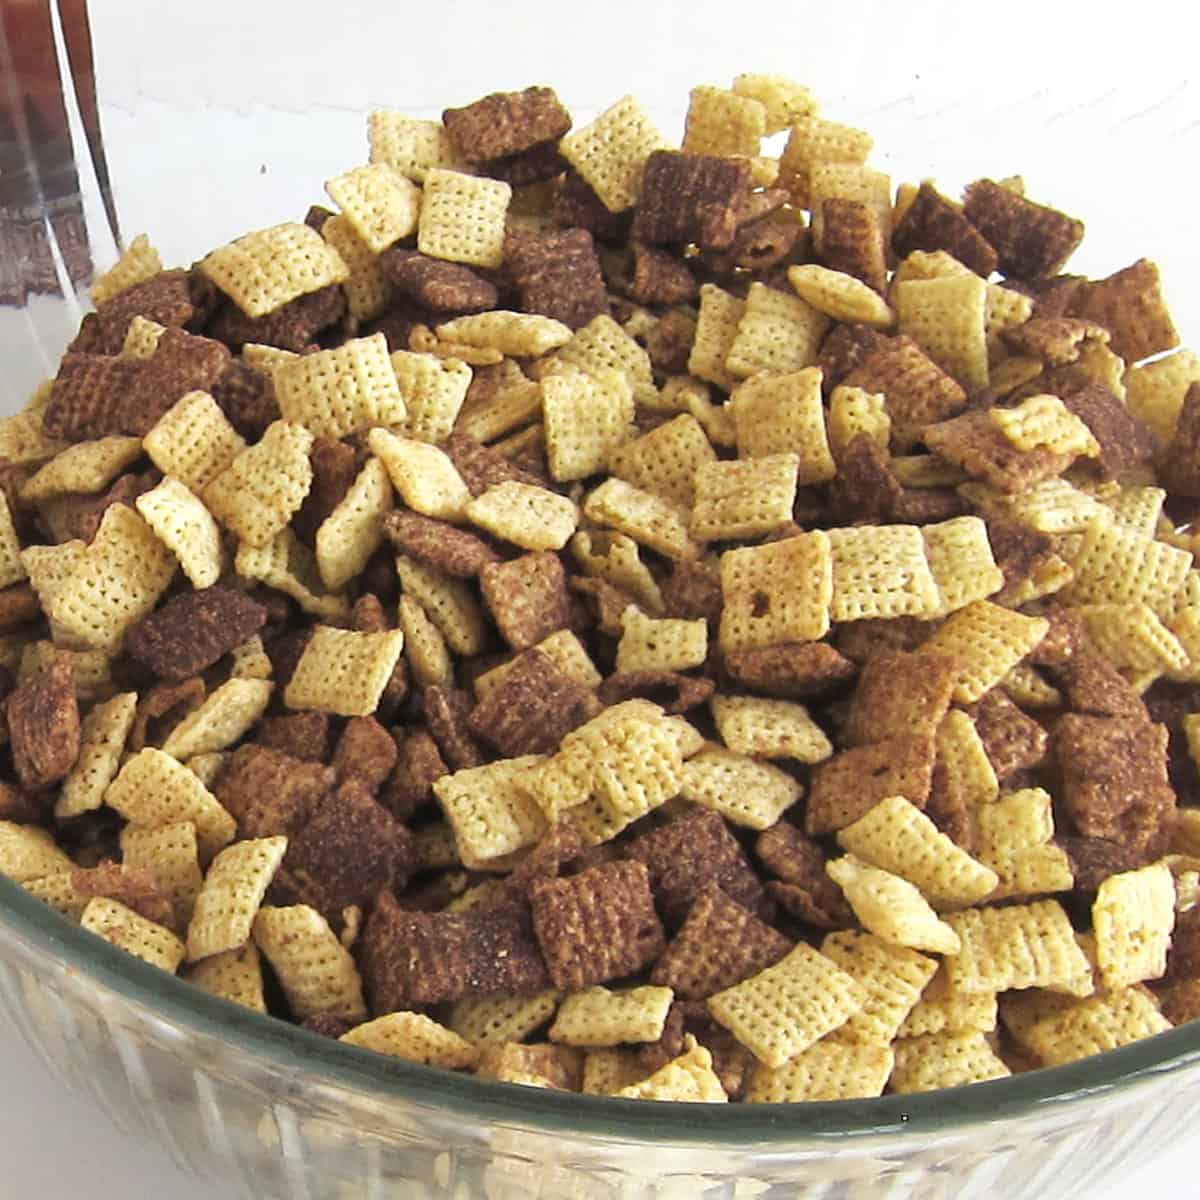 Chocolate Chex Cereal in large mixing bowl